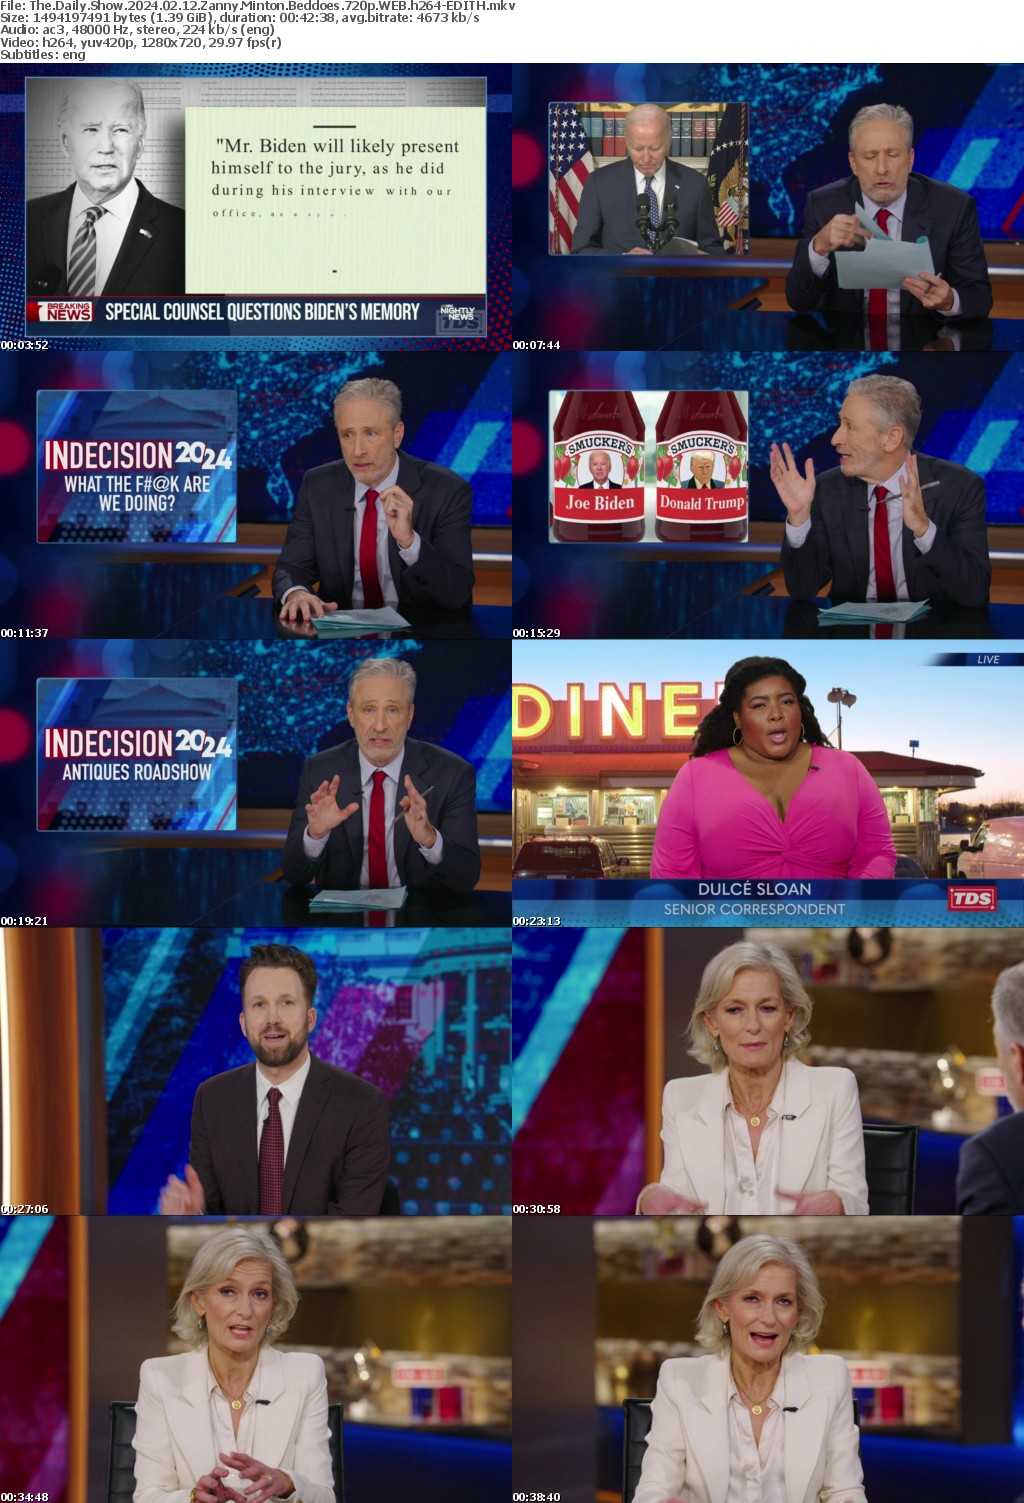 The Daily Show 2024 02 12 Zanny Minton Beddoes 720p WEB h264-EDITH